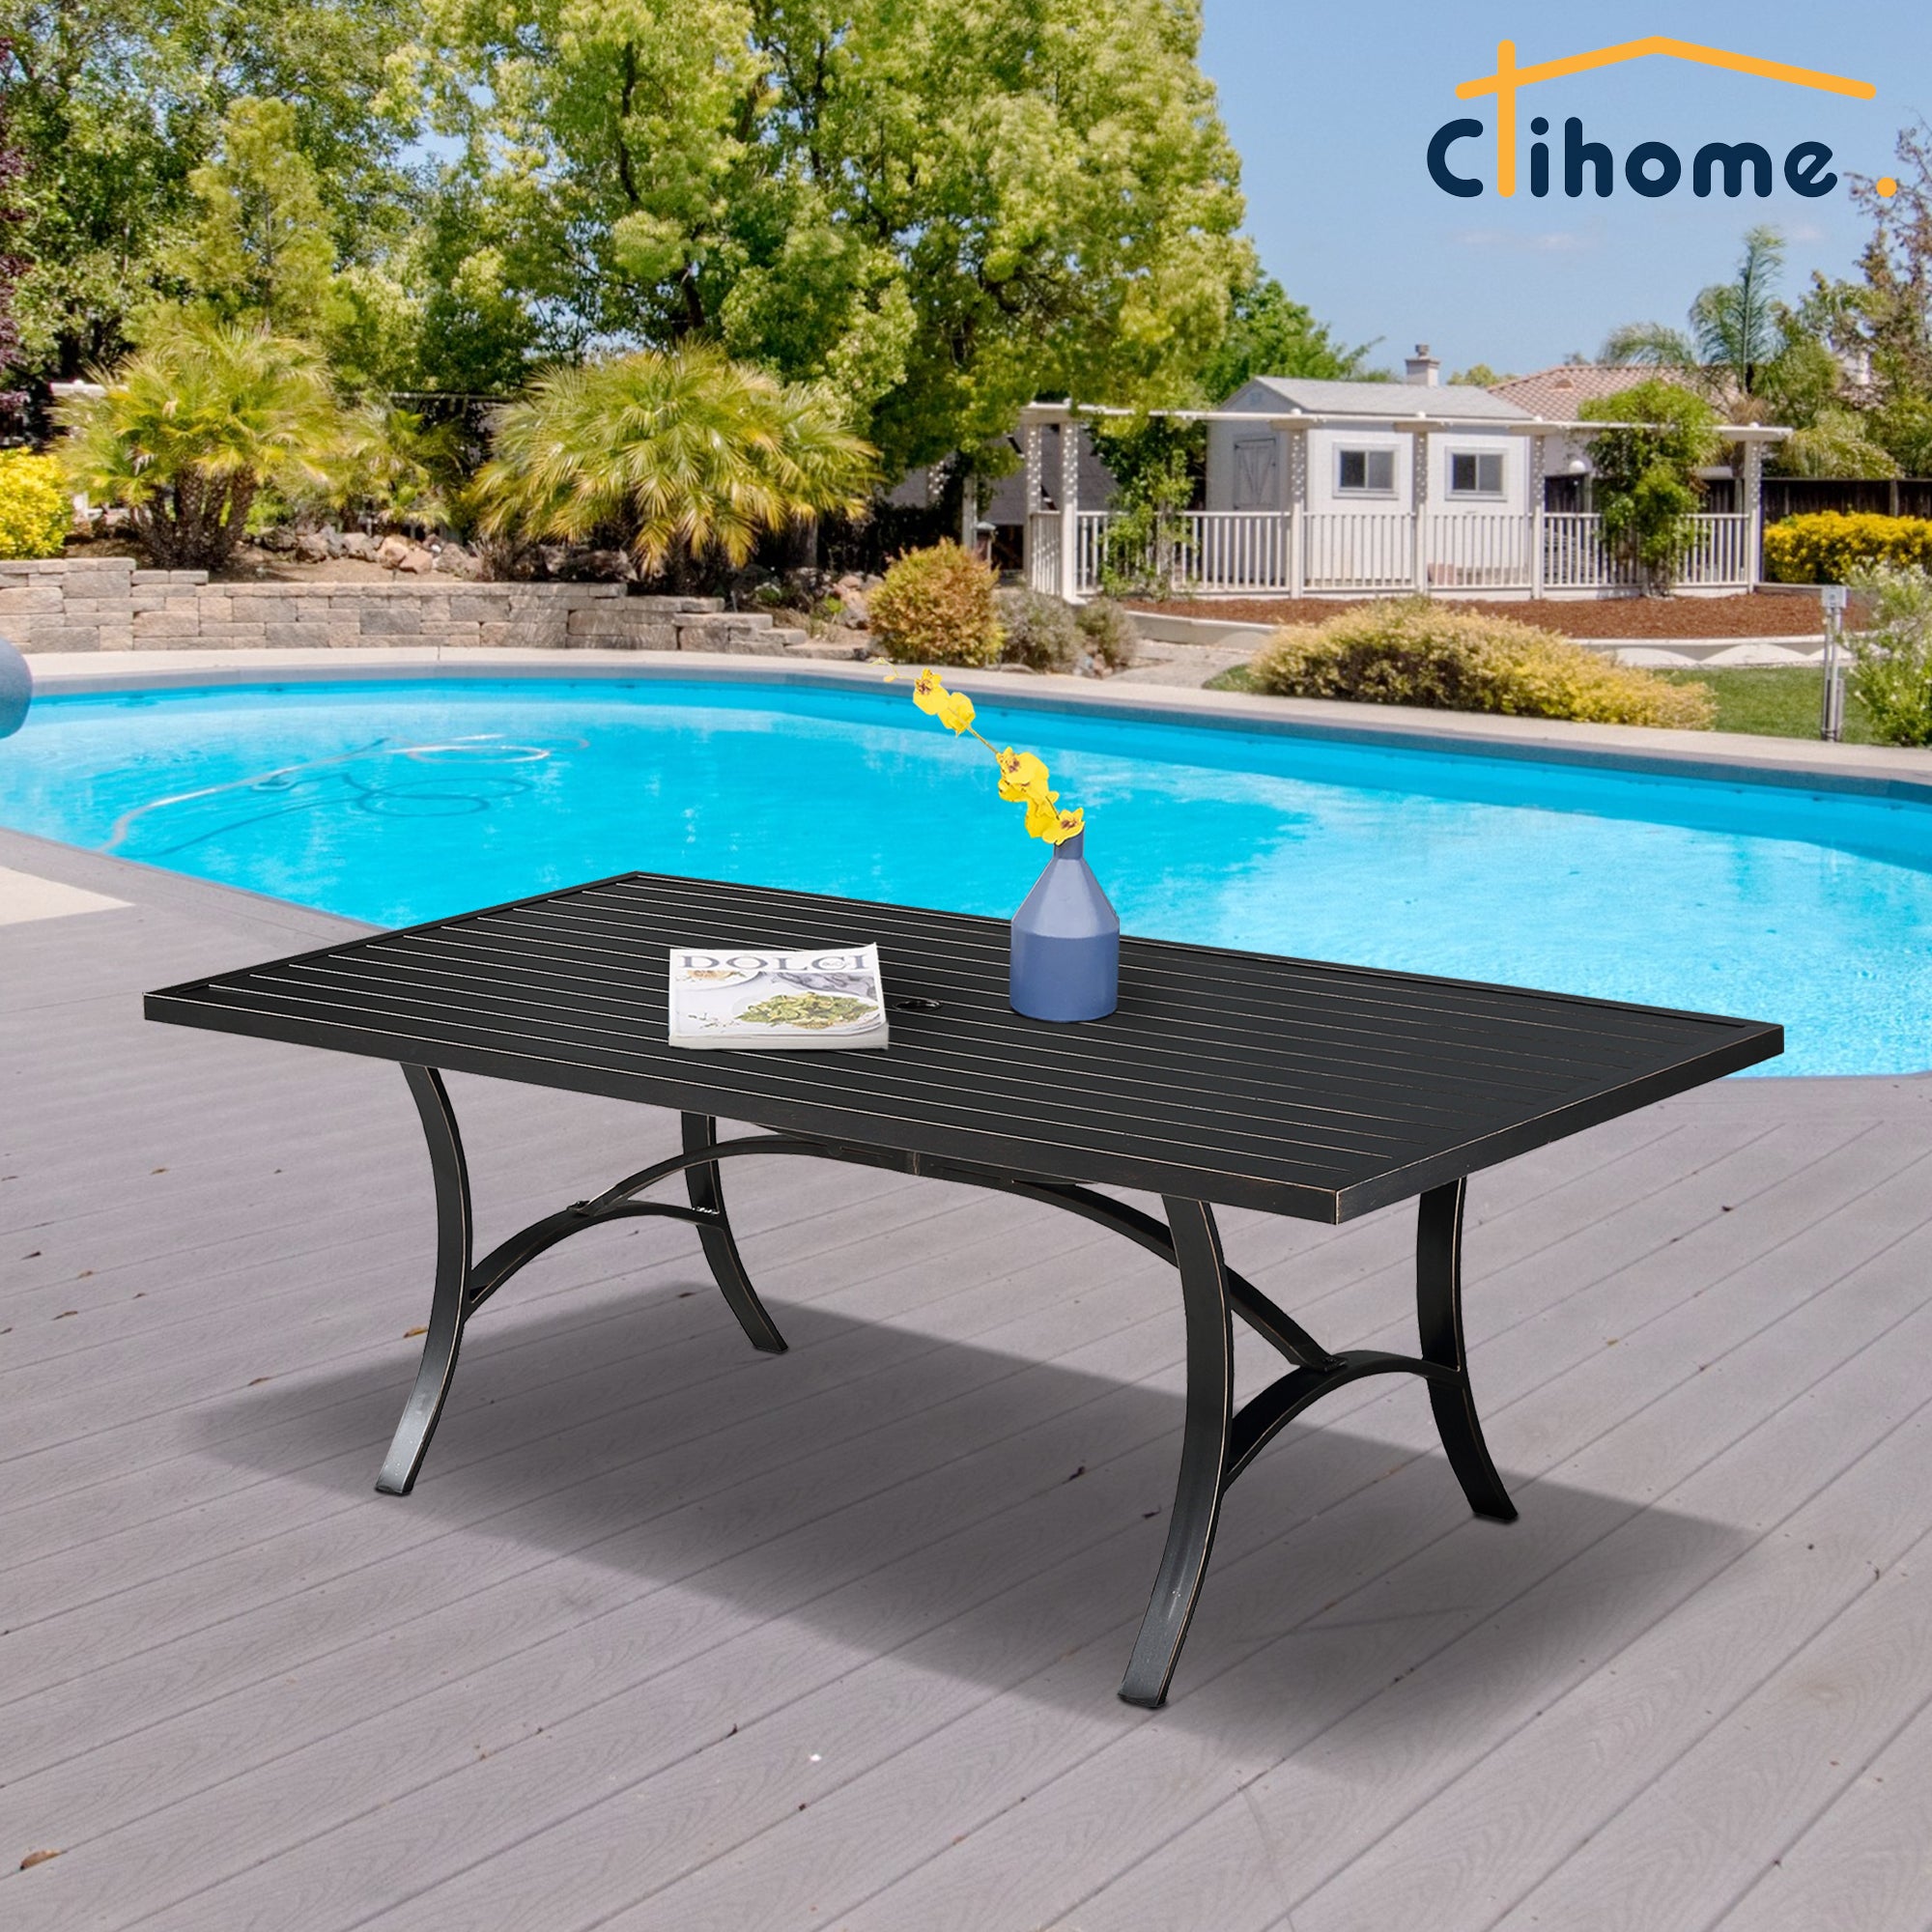 82 in. W Aluminum Steel Dining Table with Umbrella hole